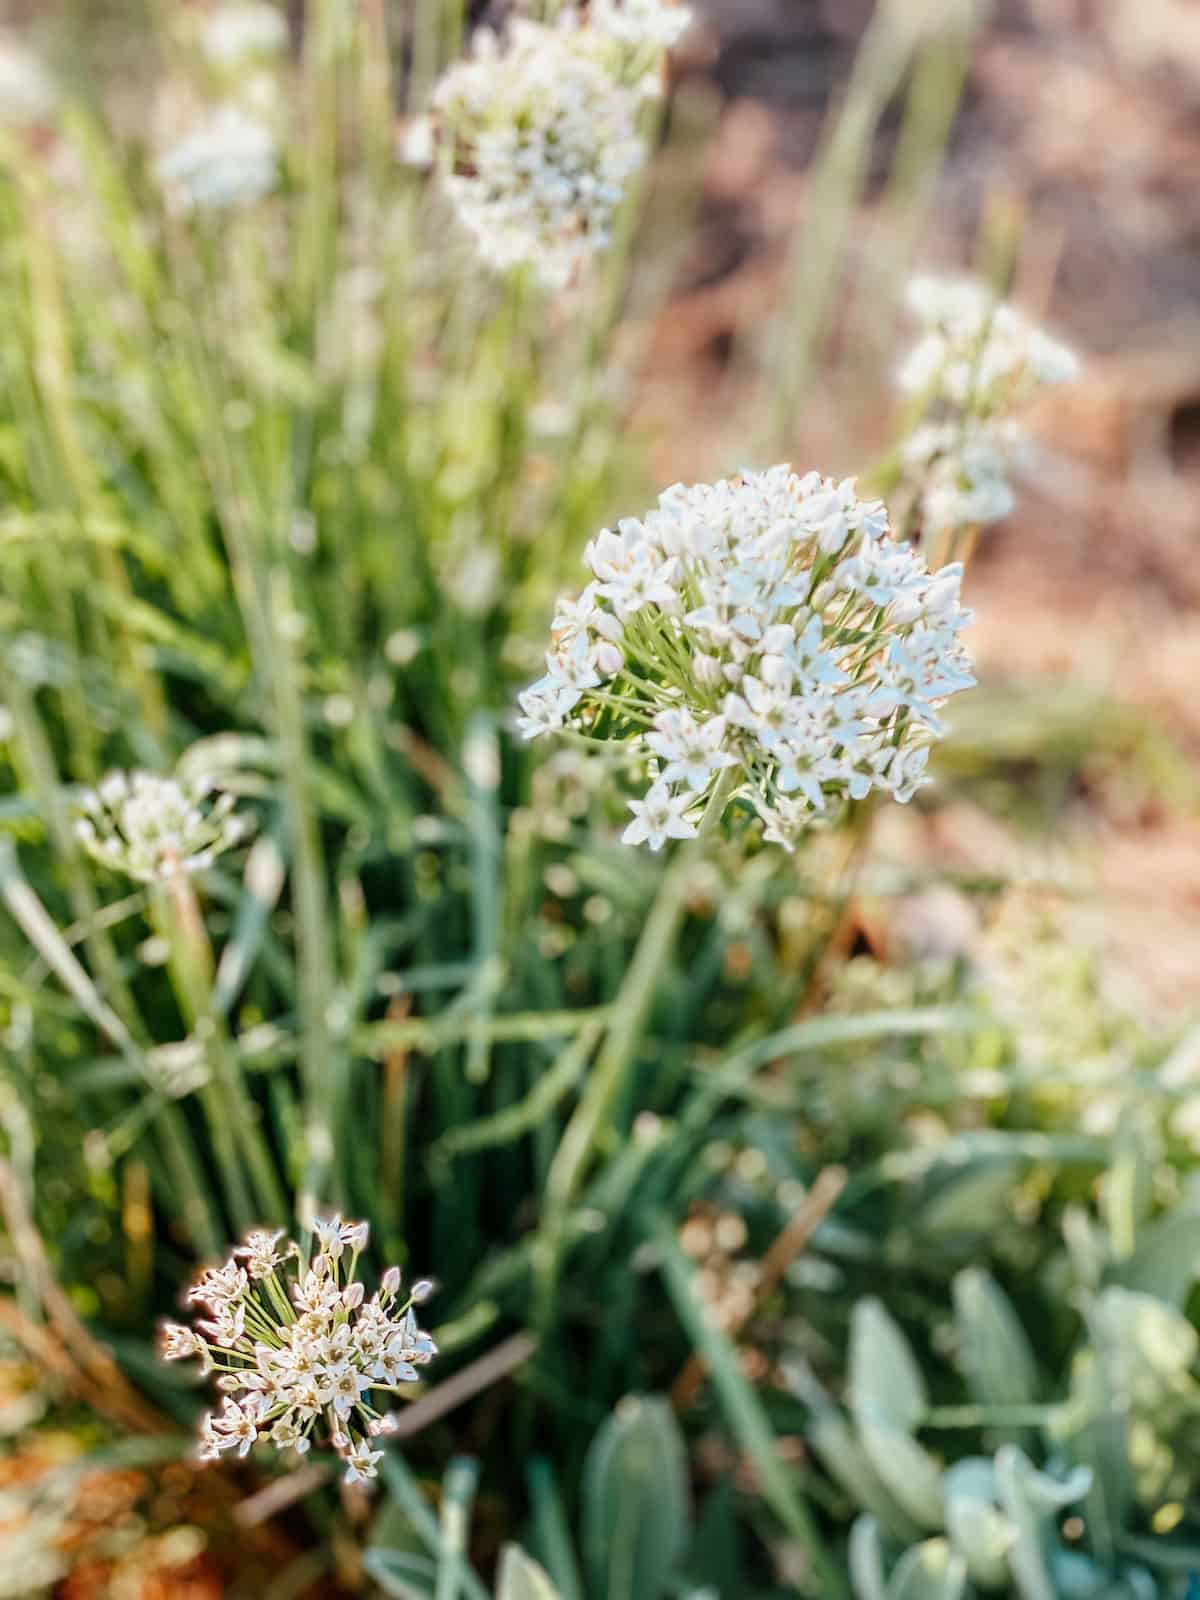 garlic chives with white flower blossoms in the garden.